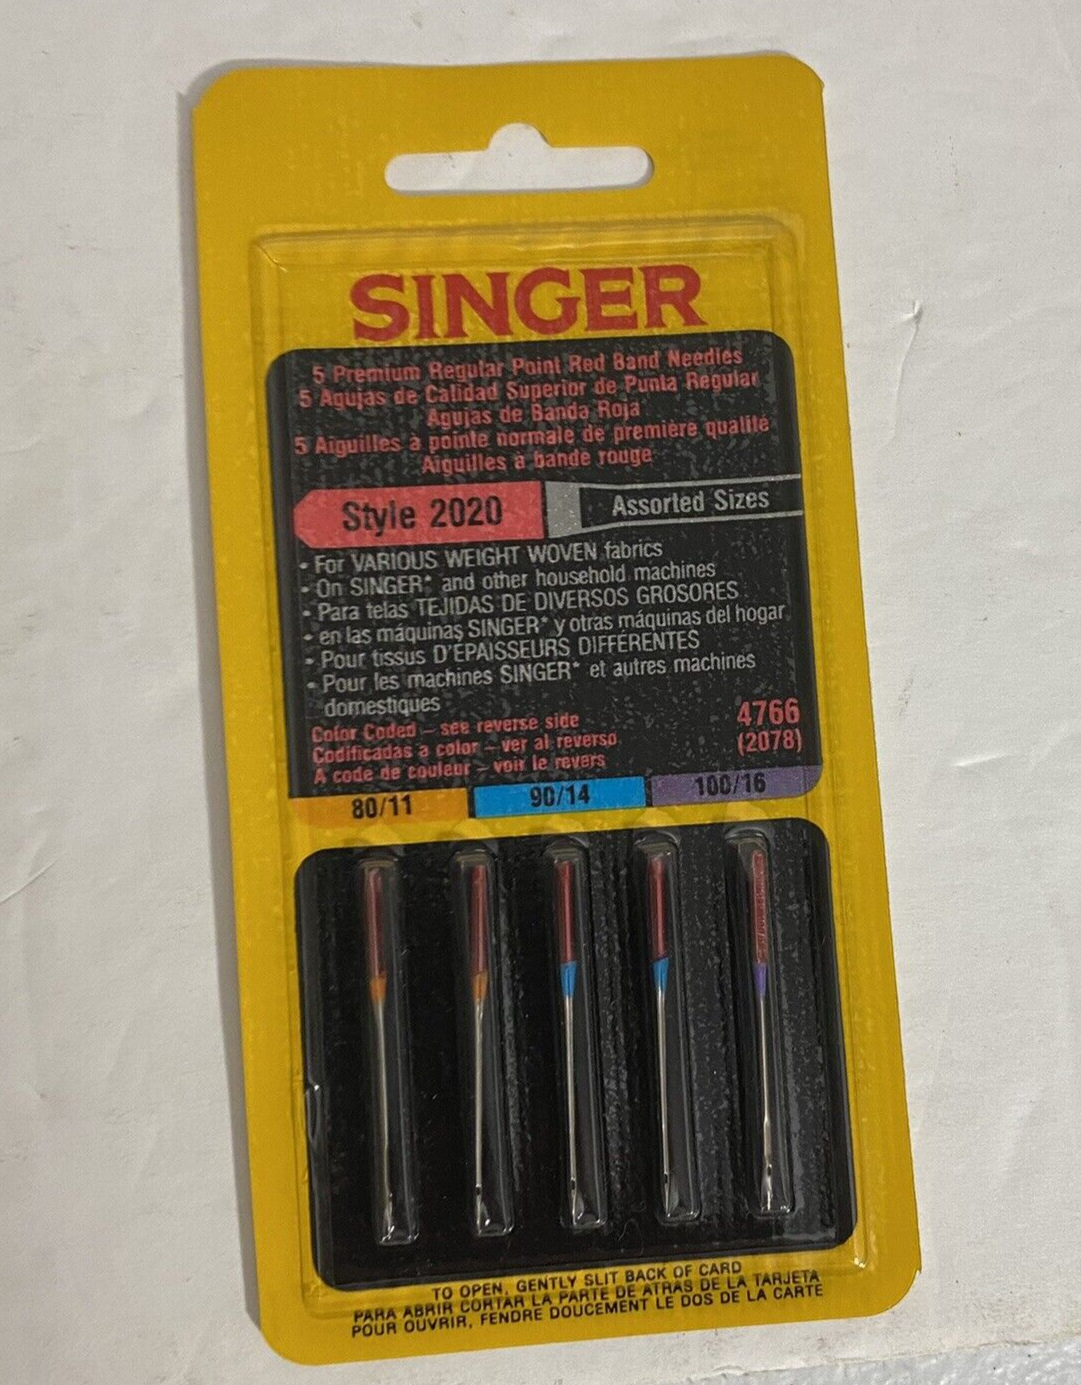 Singer Red Band Needles Style 2020 Regular Point 4766 Assorted sizes 8/11  90/14 - $5.35